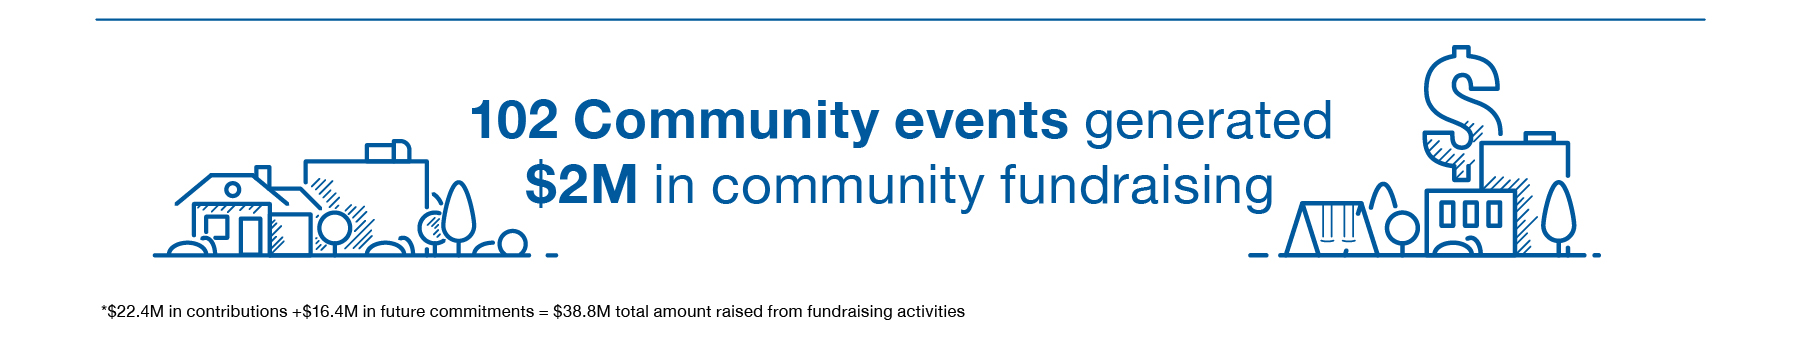 102 Community events generated $2M in community fundraising.